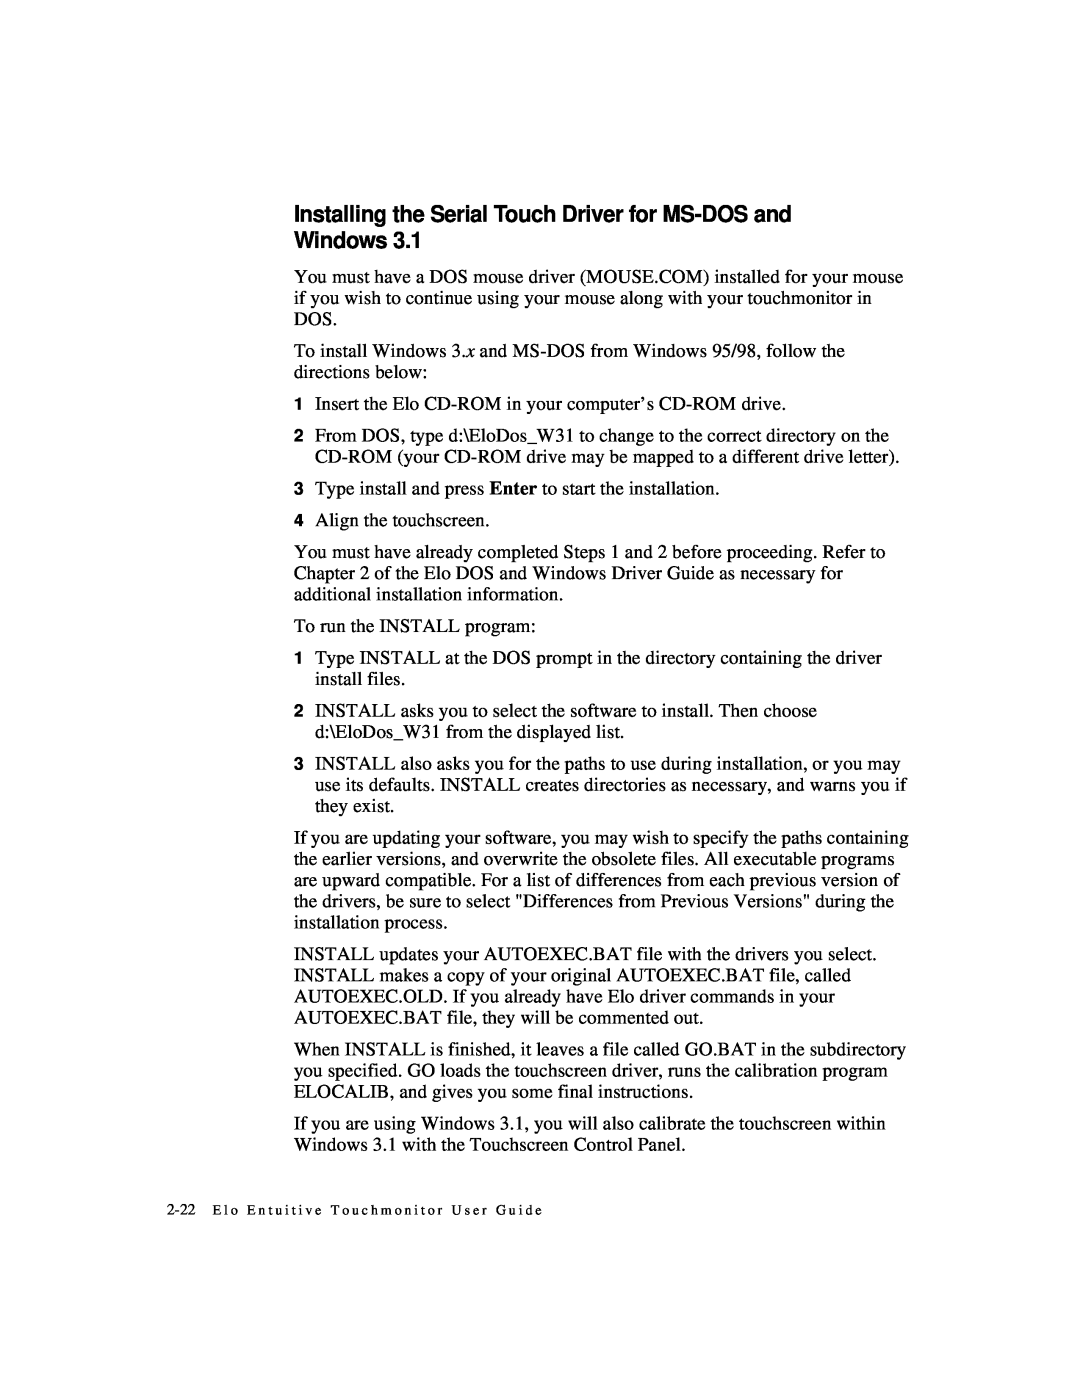 Elo TouchSystems 1525L manual Installing the Serial Touch Driver for MS-DOS and Windows 